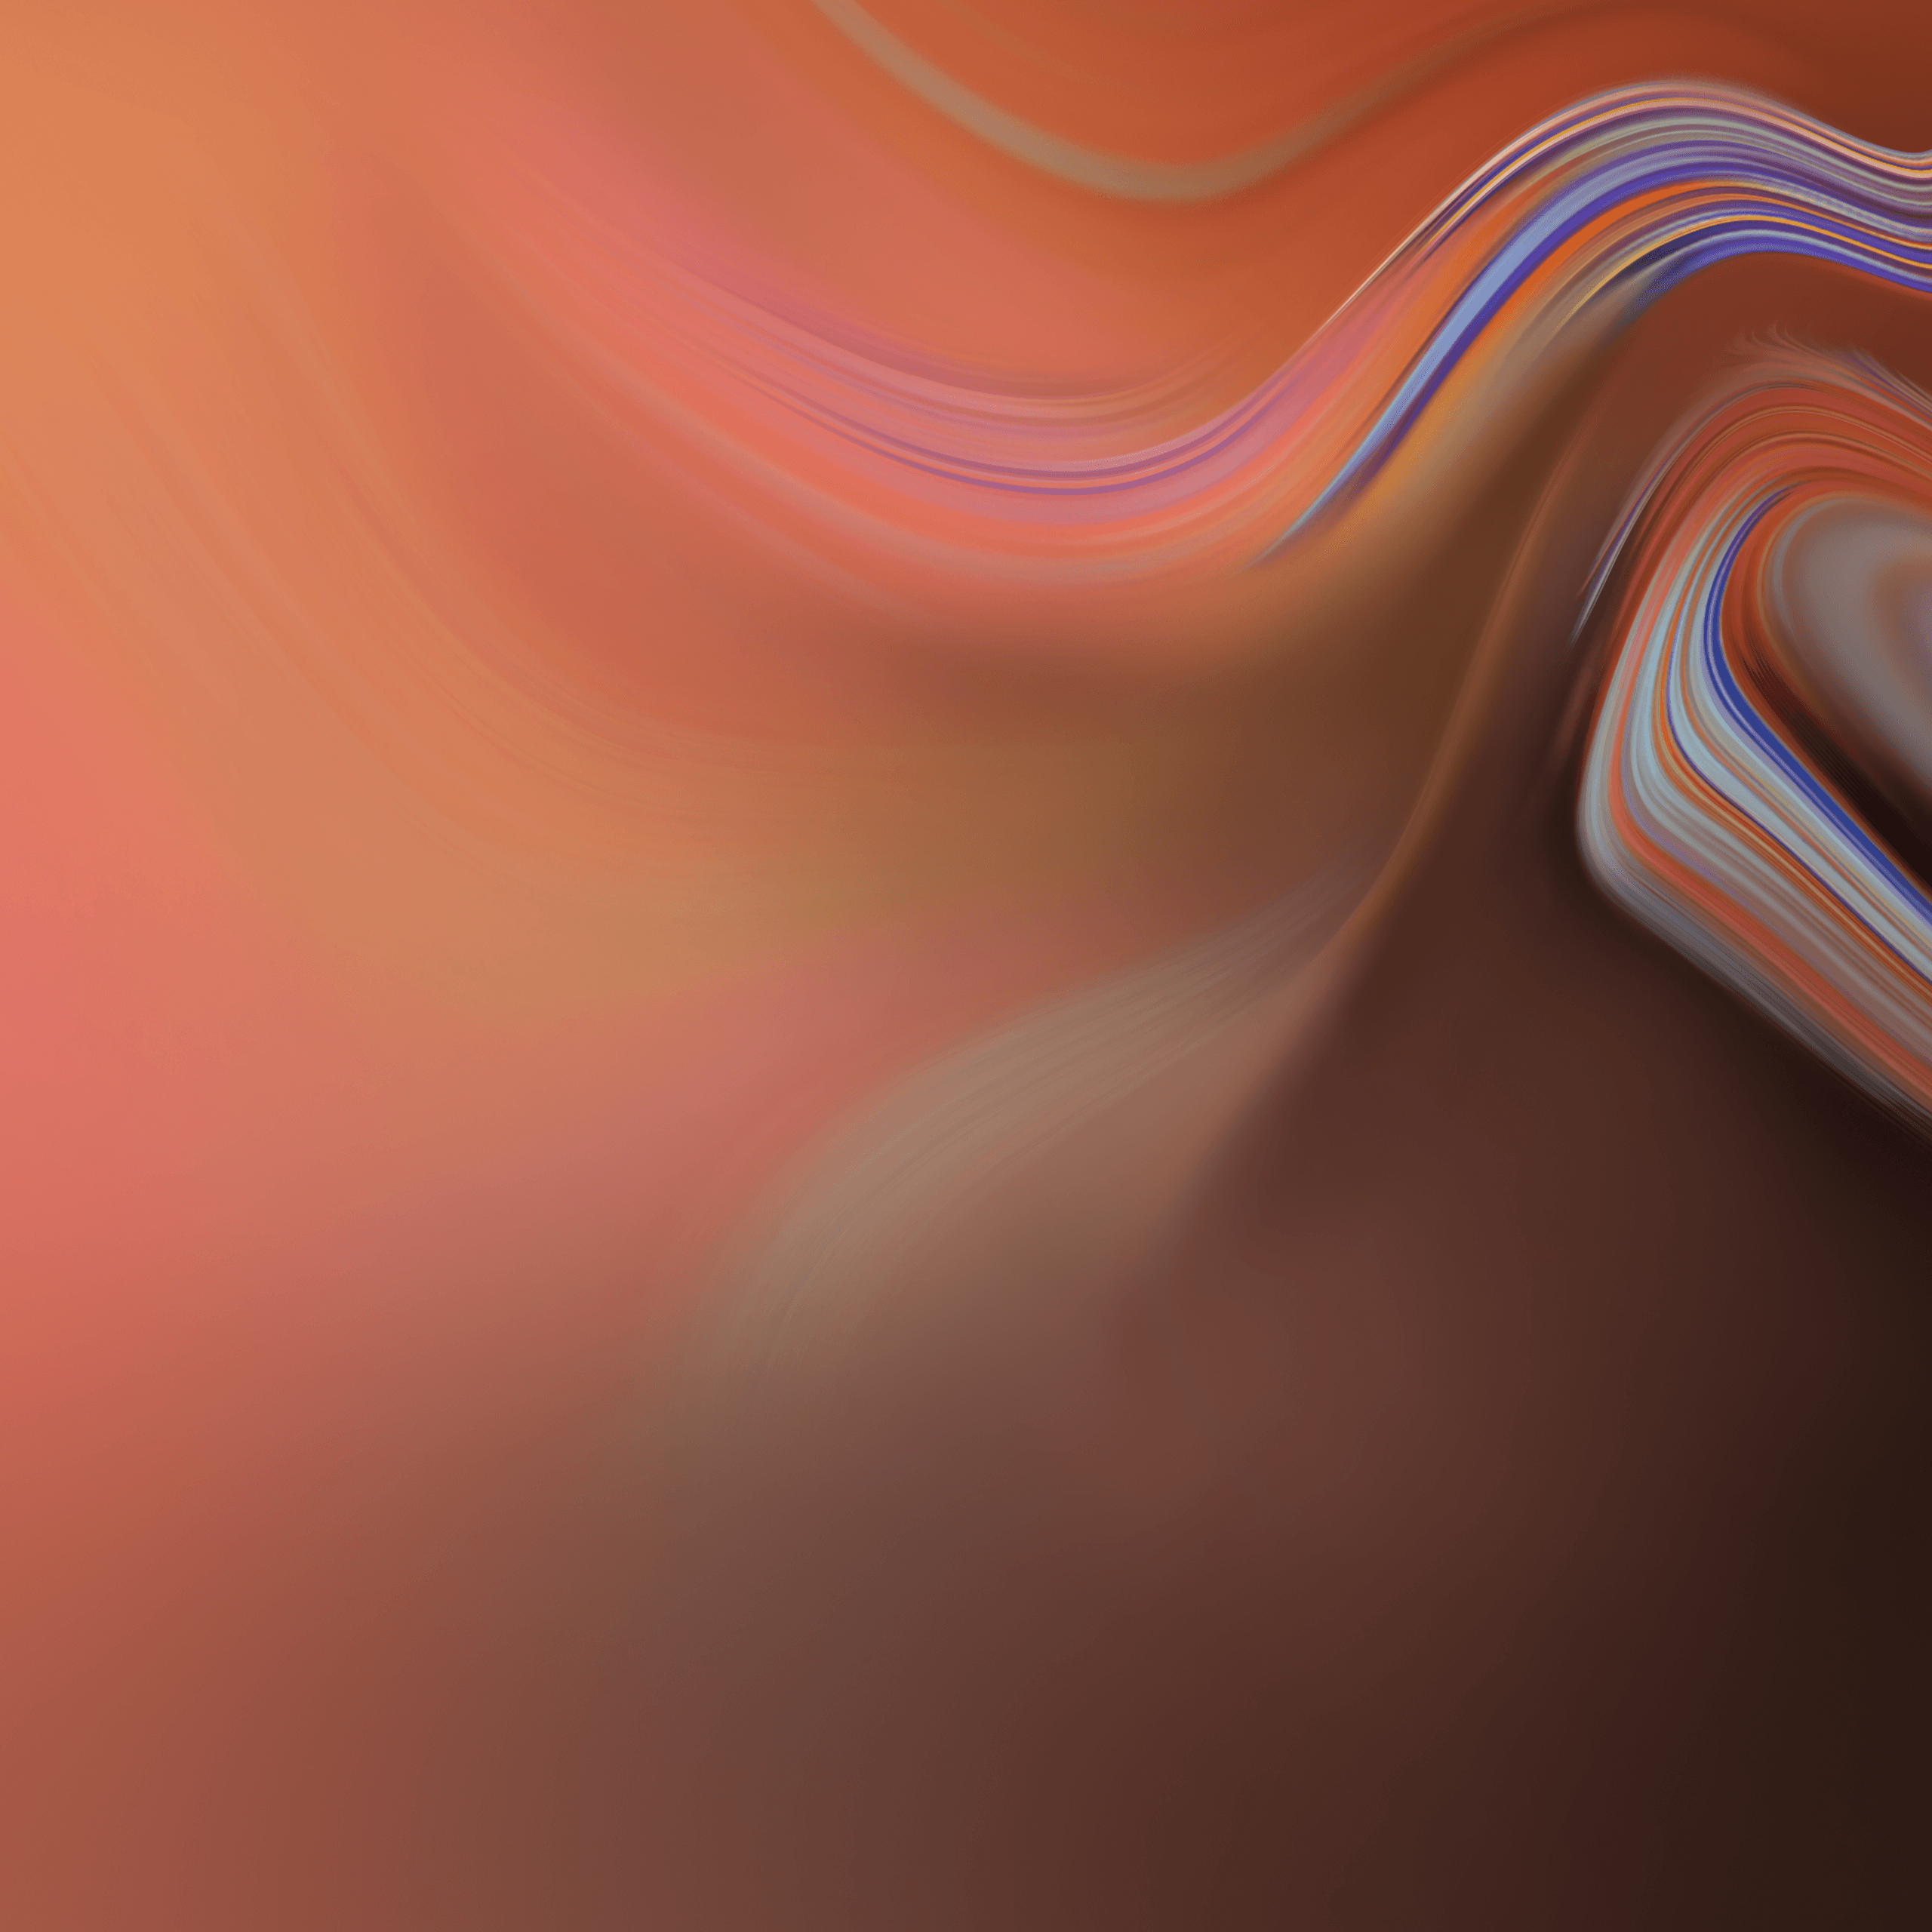 Grab The Official Galaxy Tab S4 Wallpapers Here